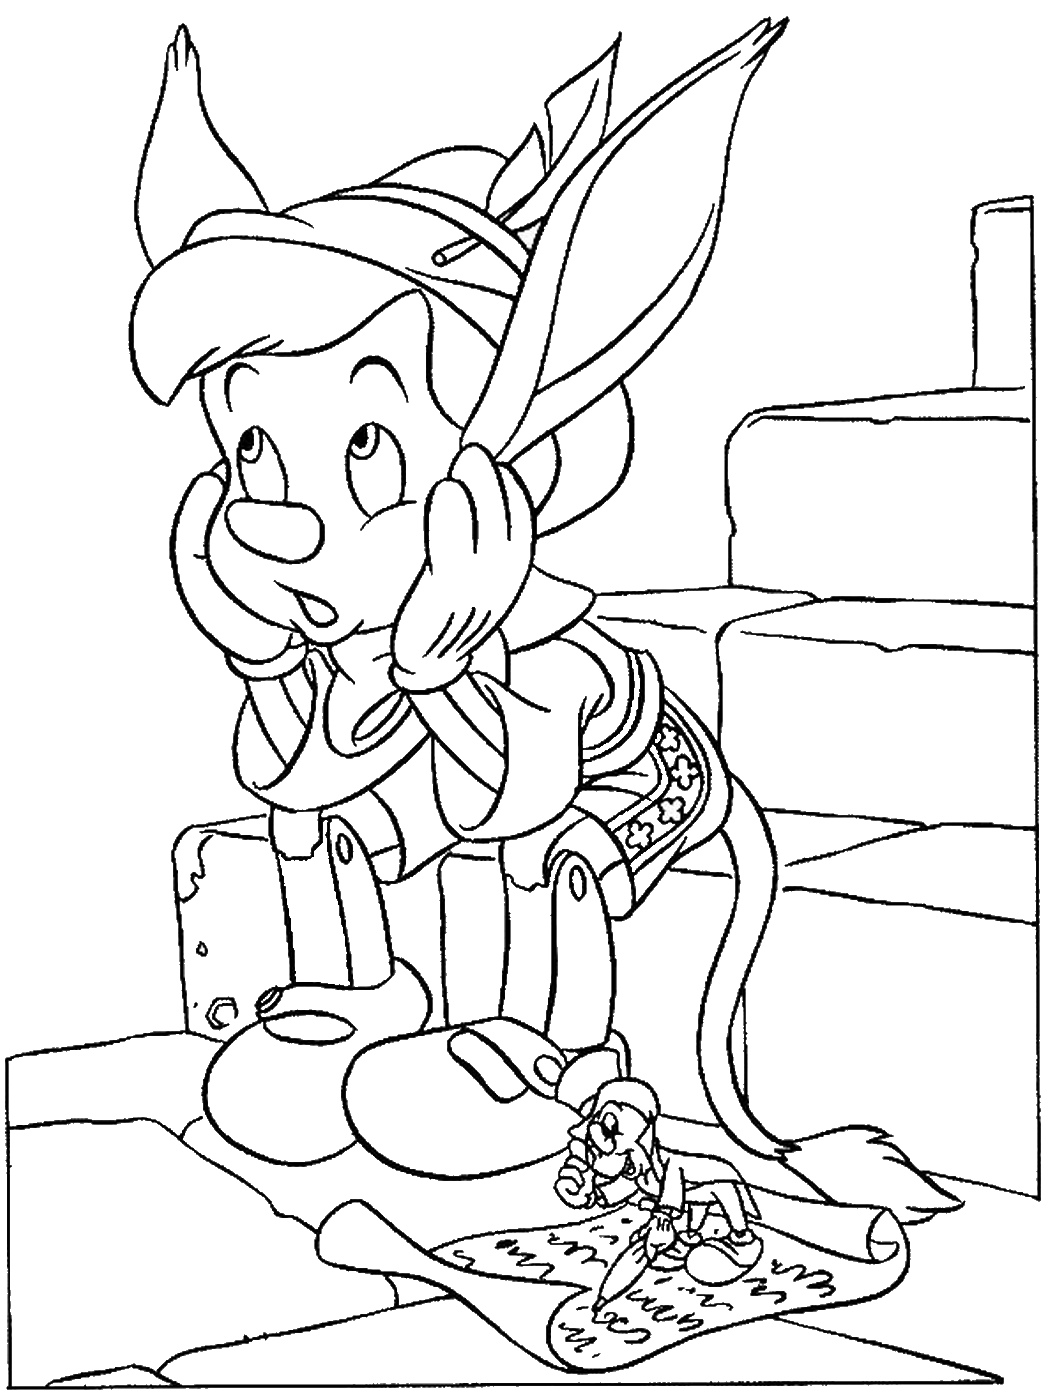 Pinocchio Coloring Pages TV Film Pinocchio_coloring_6 Printable 2020 06336 Coloring4free